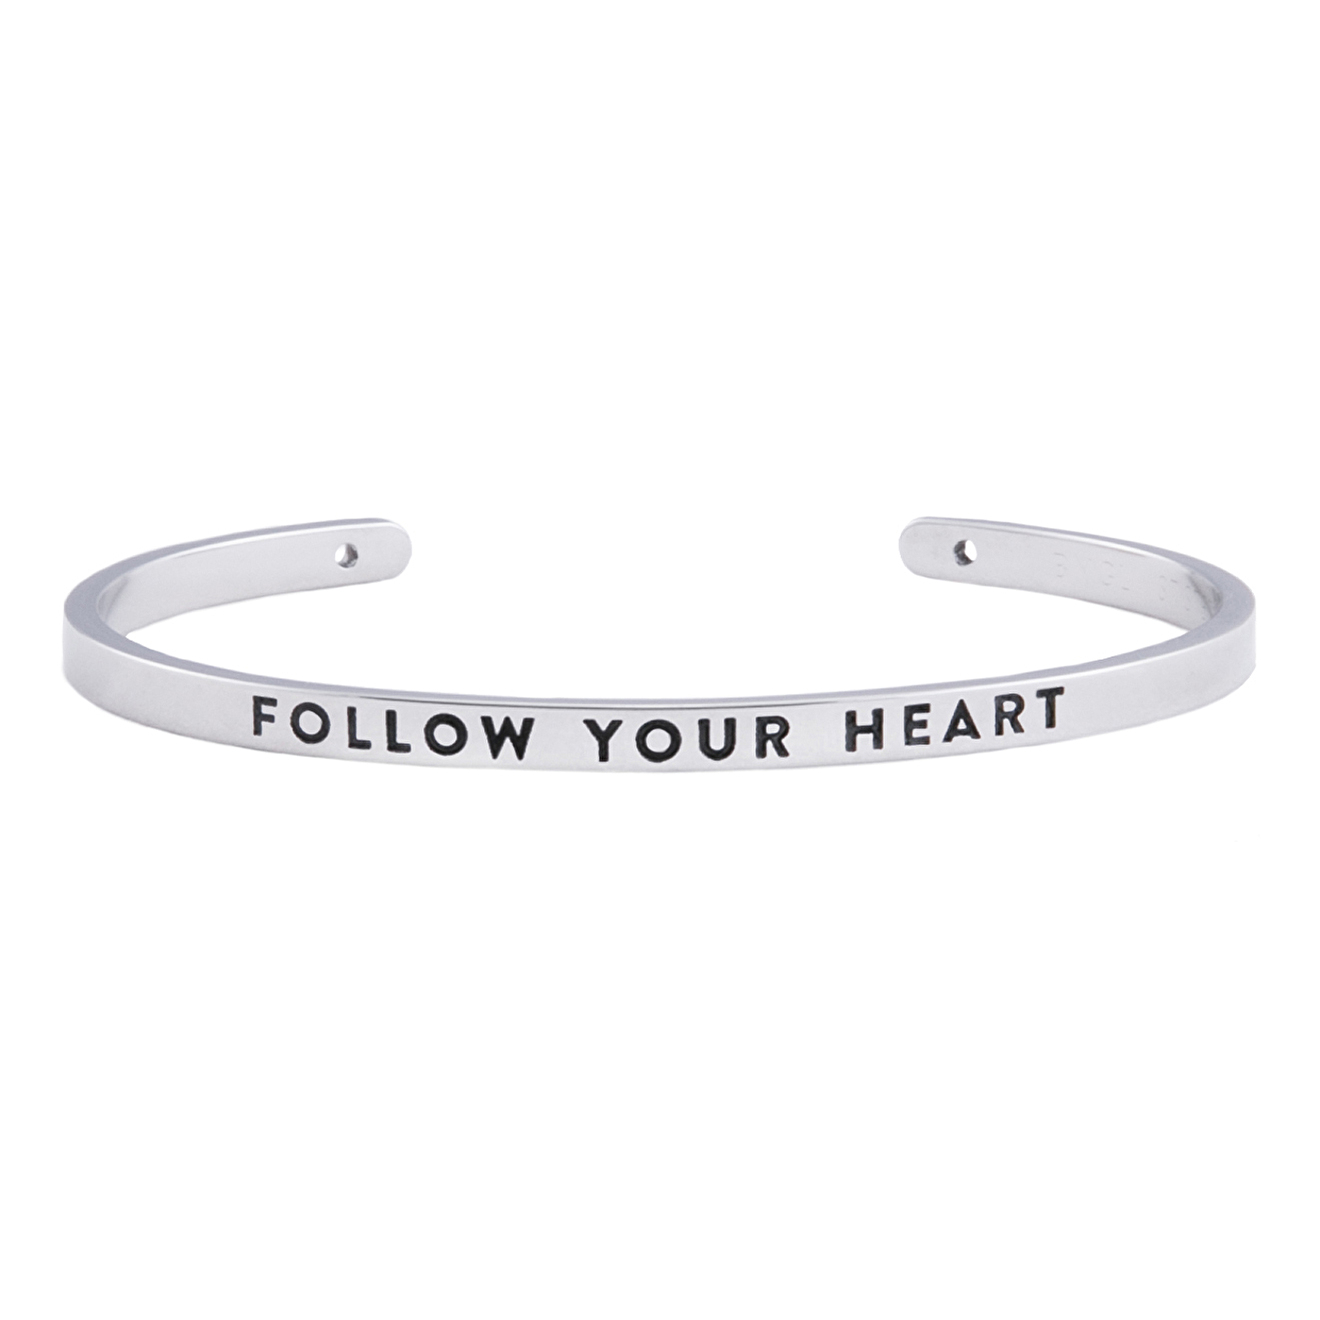 BNGL браслет FOLLOW YOUR HEART bngl браслет follow your inspiration